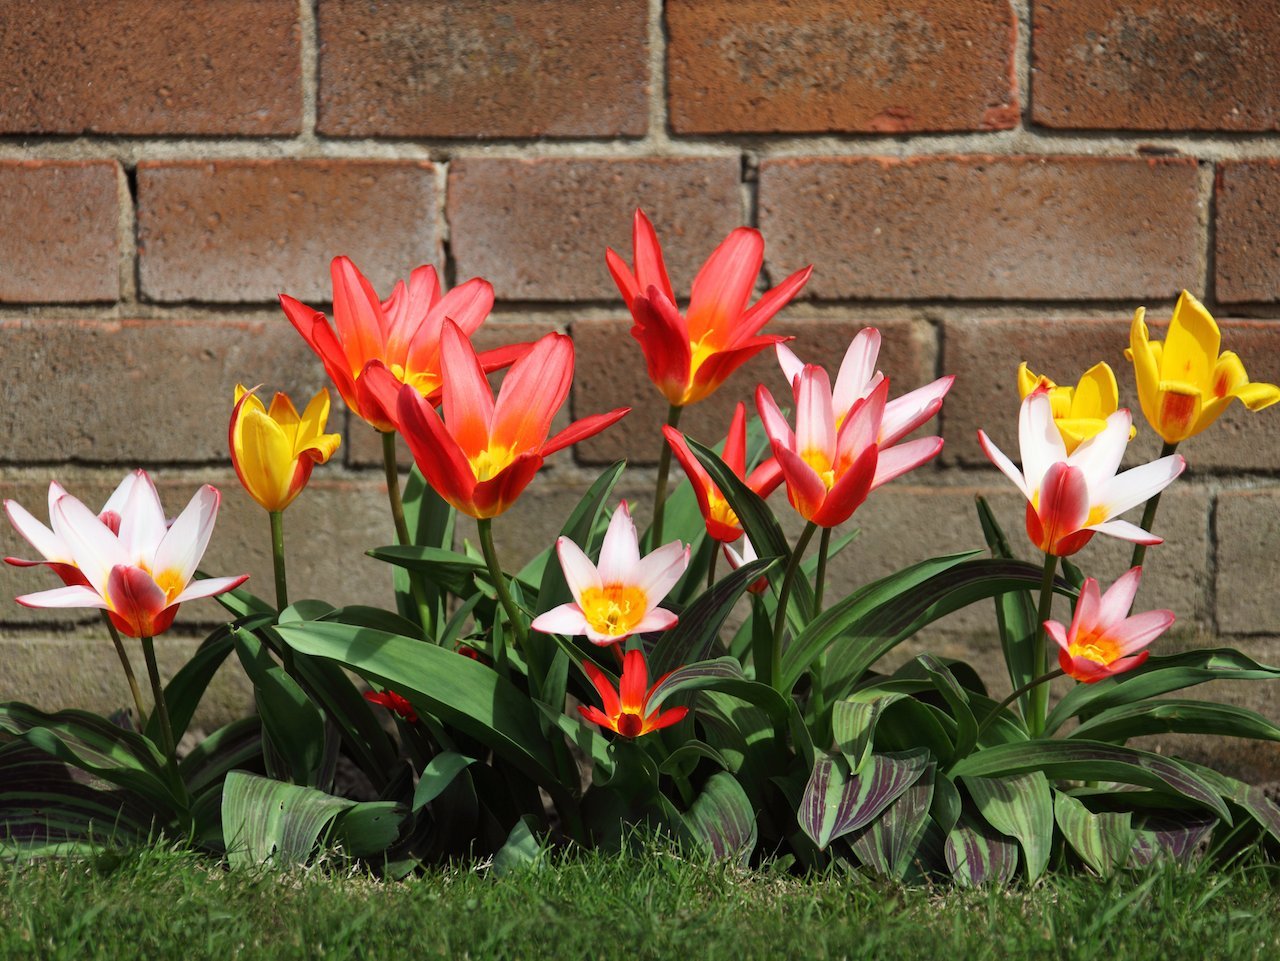 Plant your bulbs in the fall so they blossom in the spring.